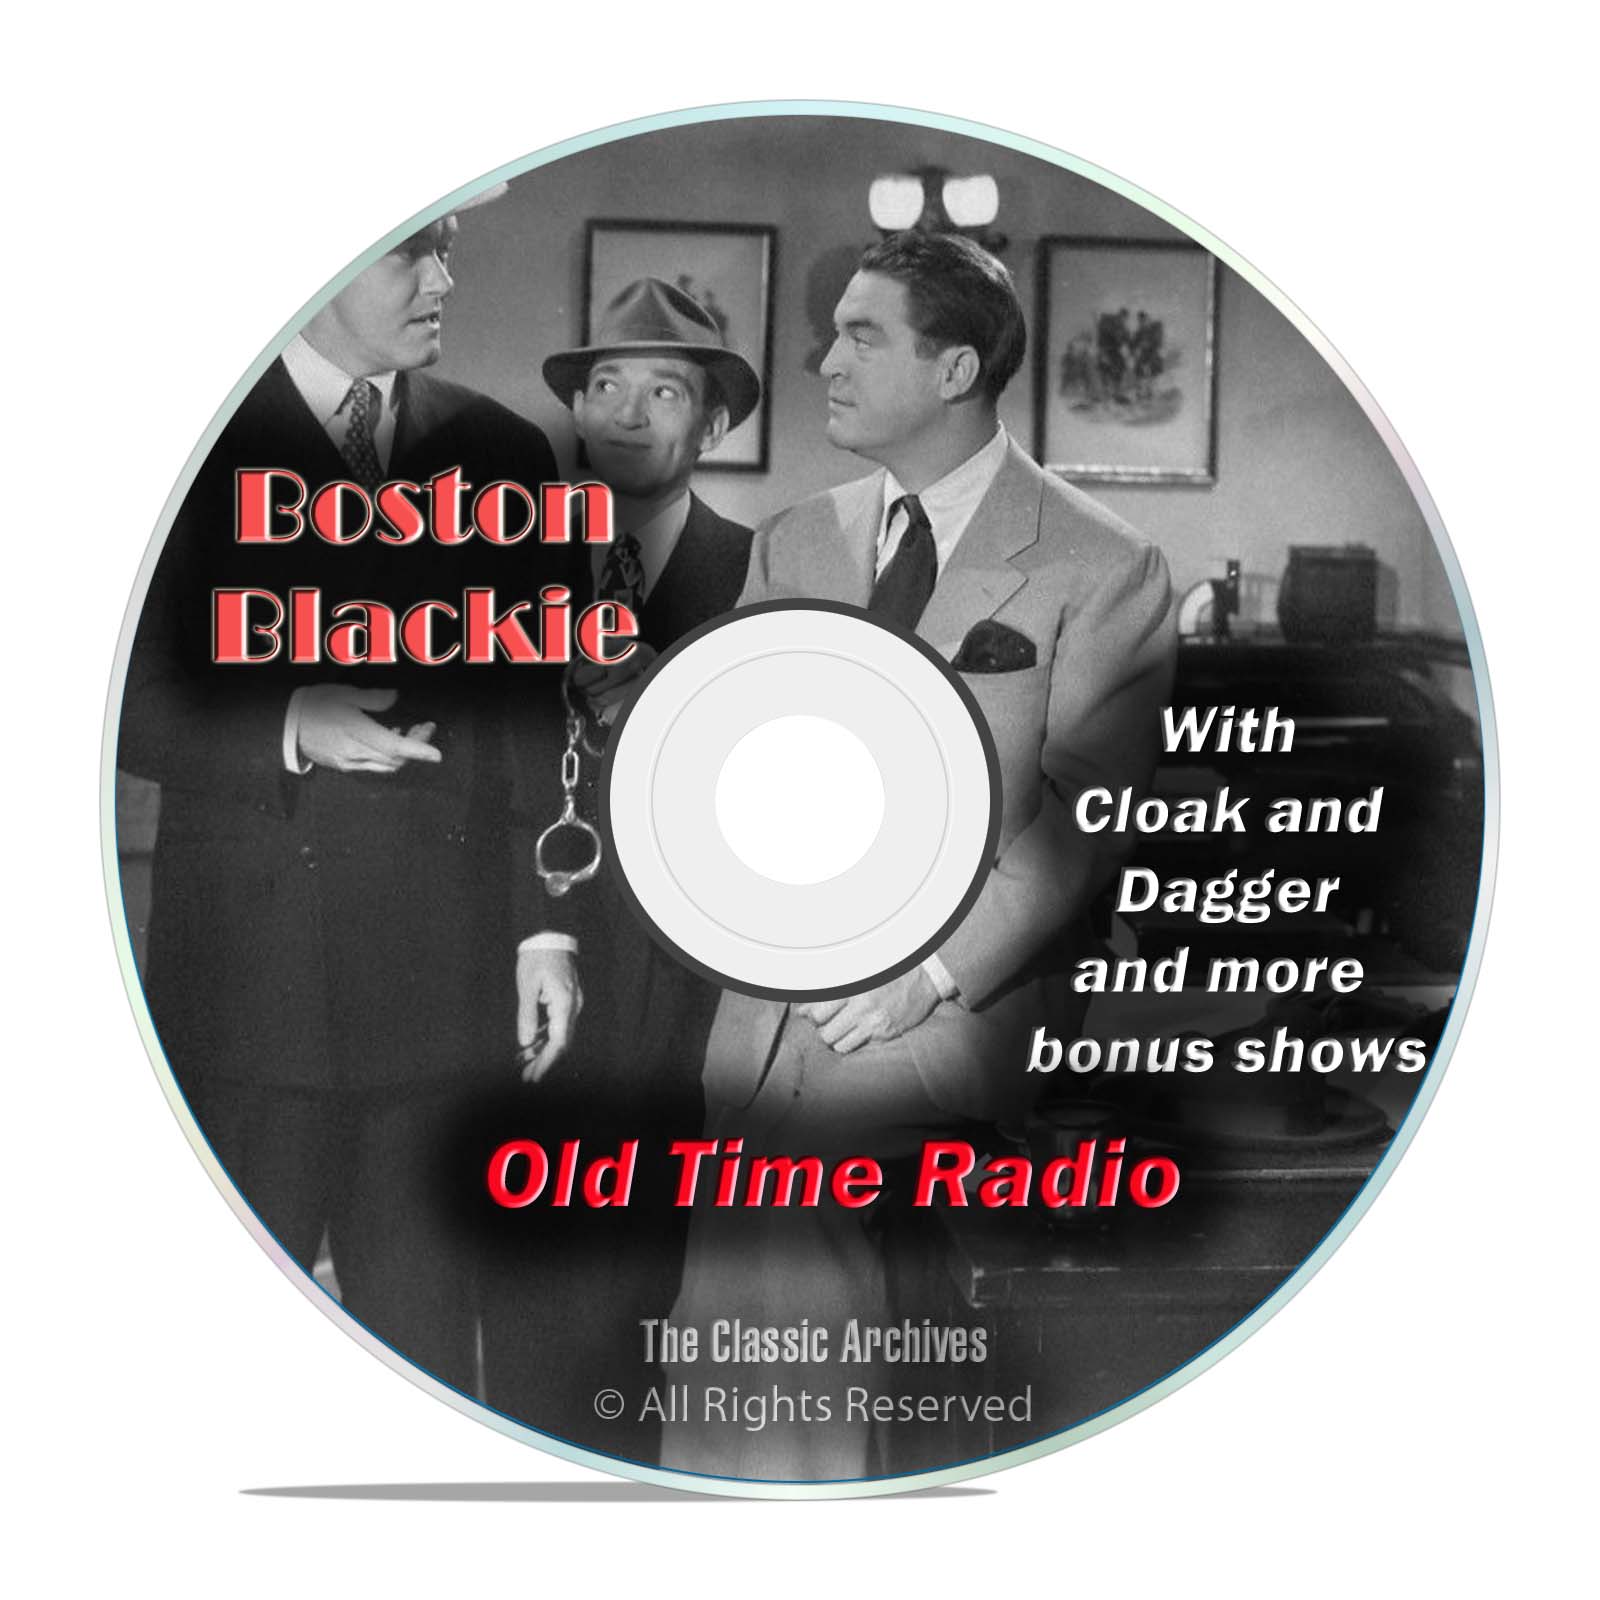 Boston Blackie, 1,060 Mystery Thriller Old Time Radio Shows, OTR, DVD - Click Image to Close